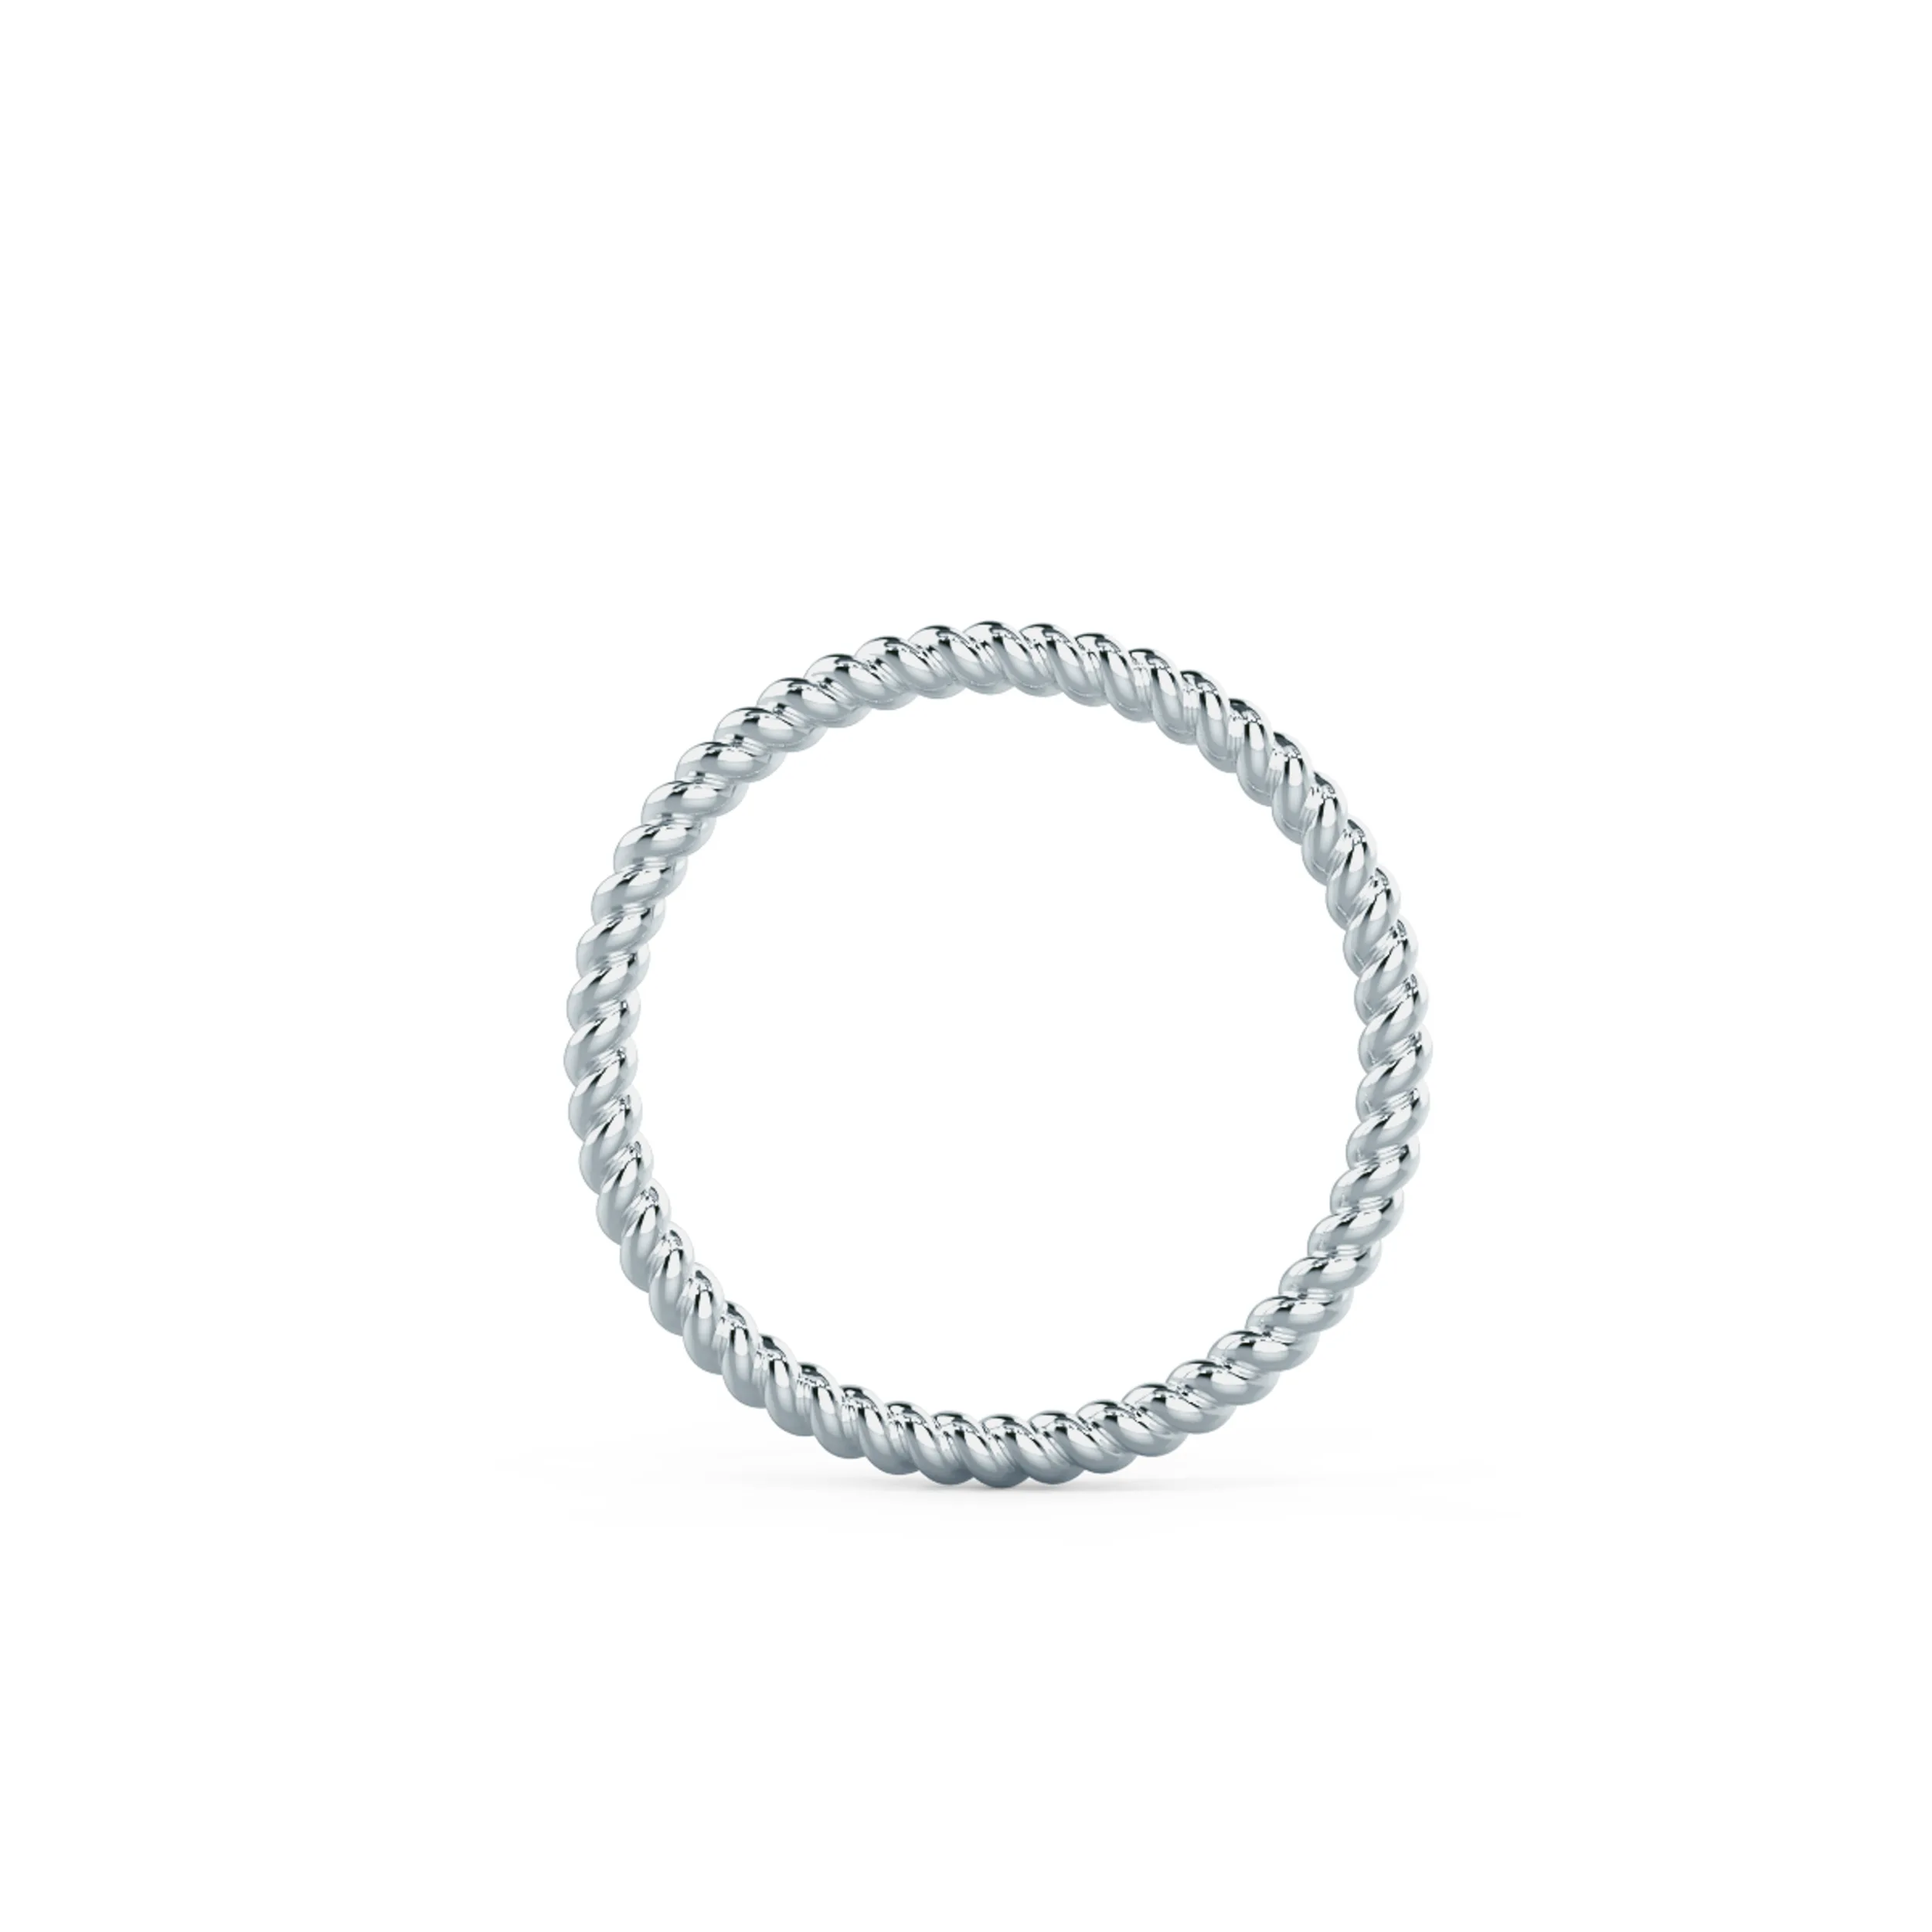 White Gold Rope Eternity Band featuring Hand Selected Plain Metal Lab Diamonds (Profile View)